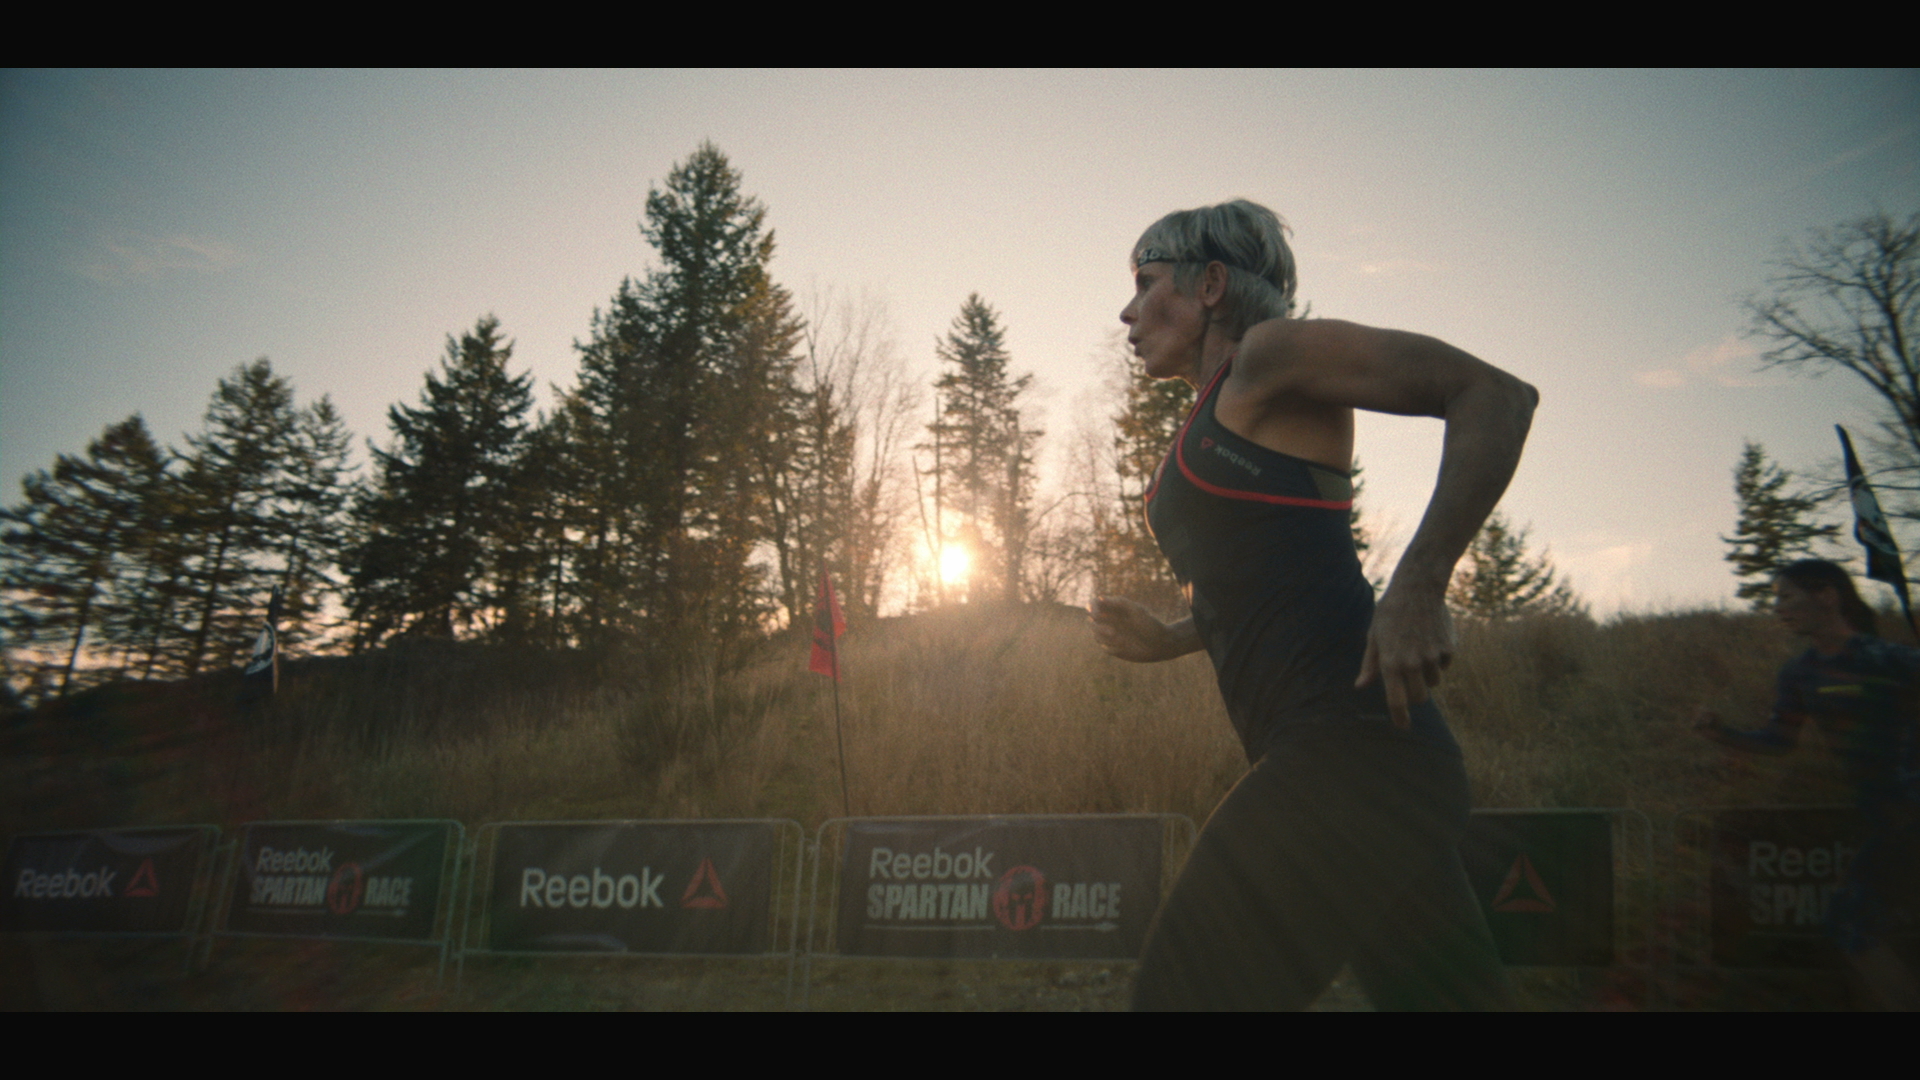 Reebok Campaign Inspires People to Honor Bodies | Business Wire